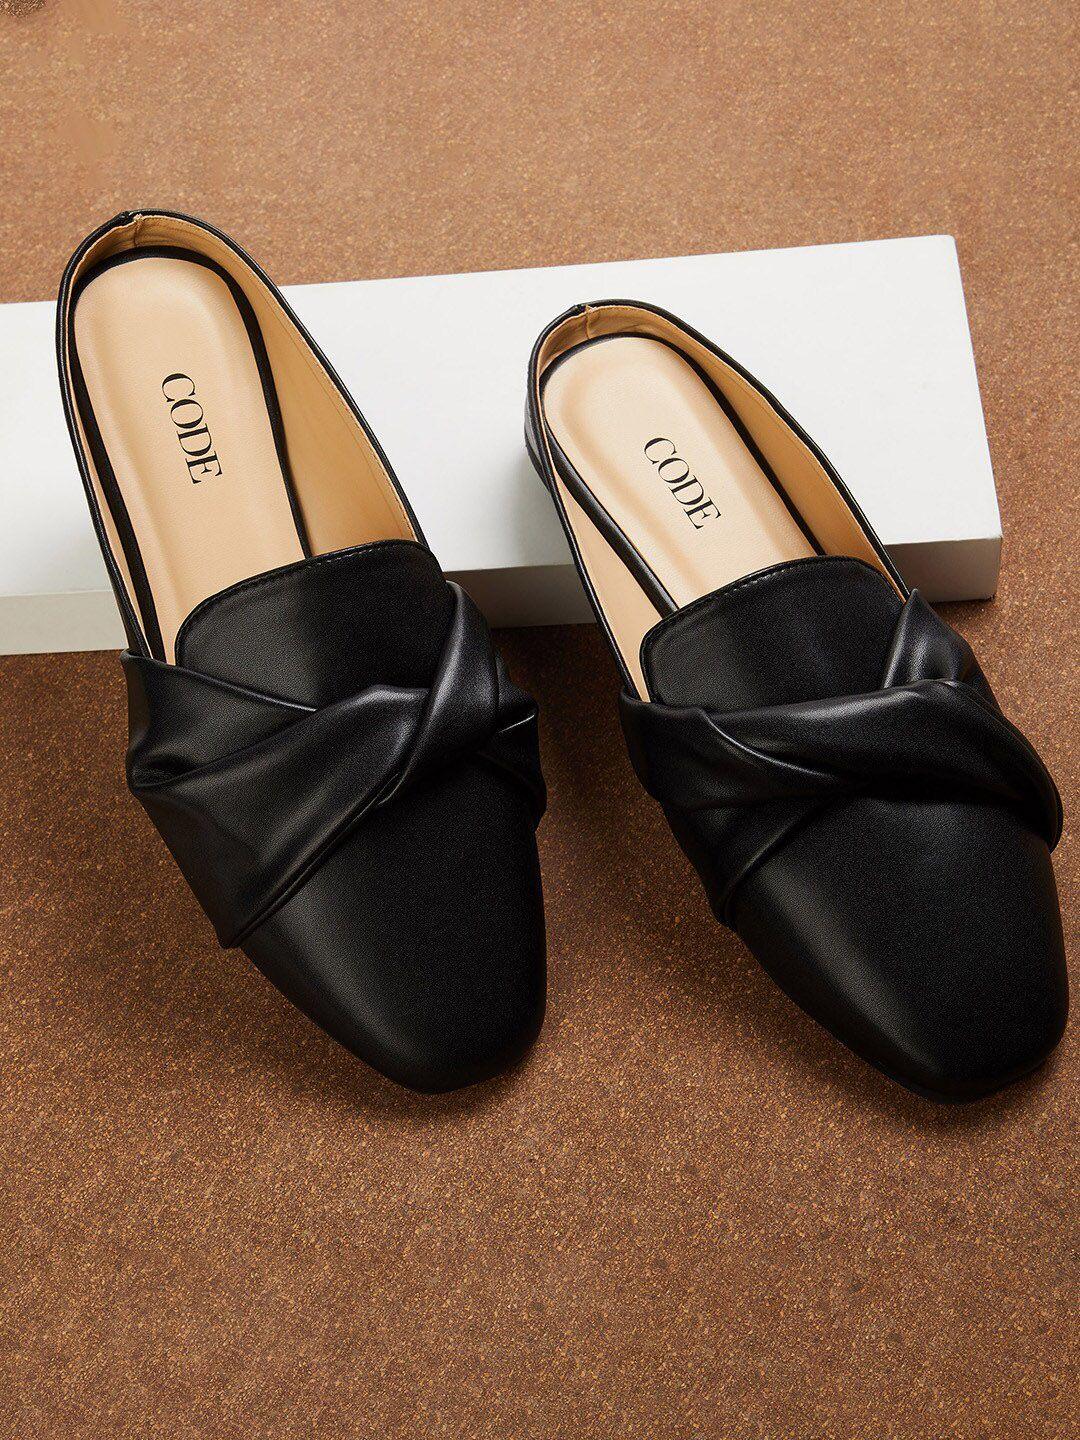 code by lifestyle women mules flats